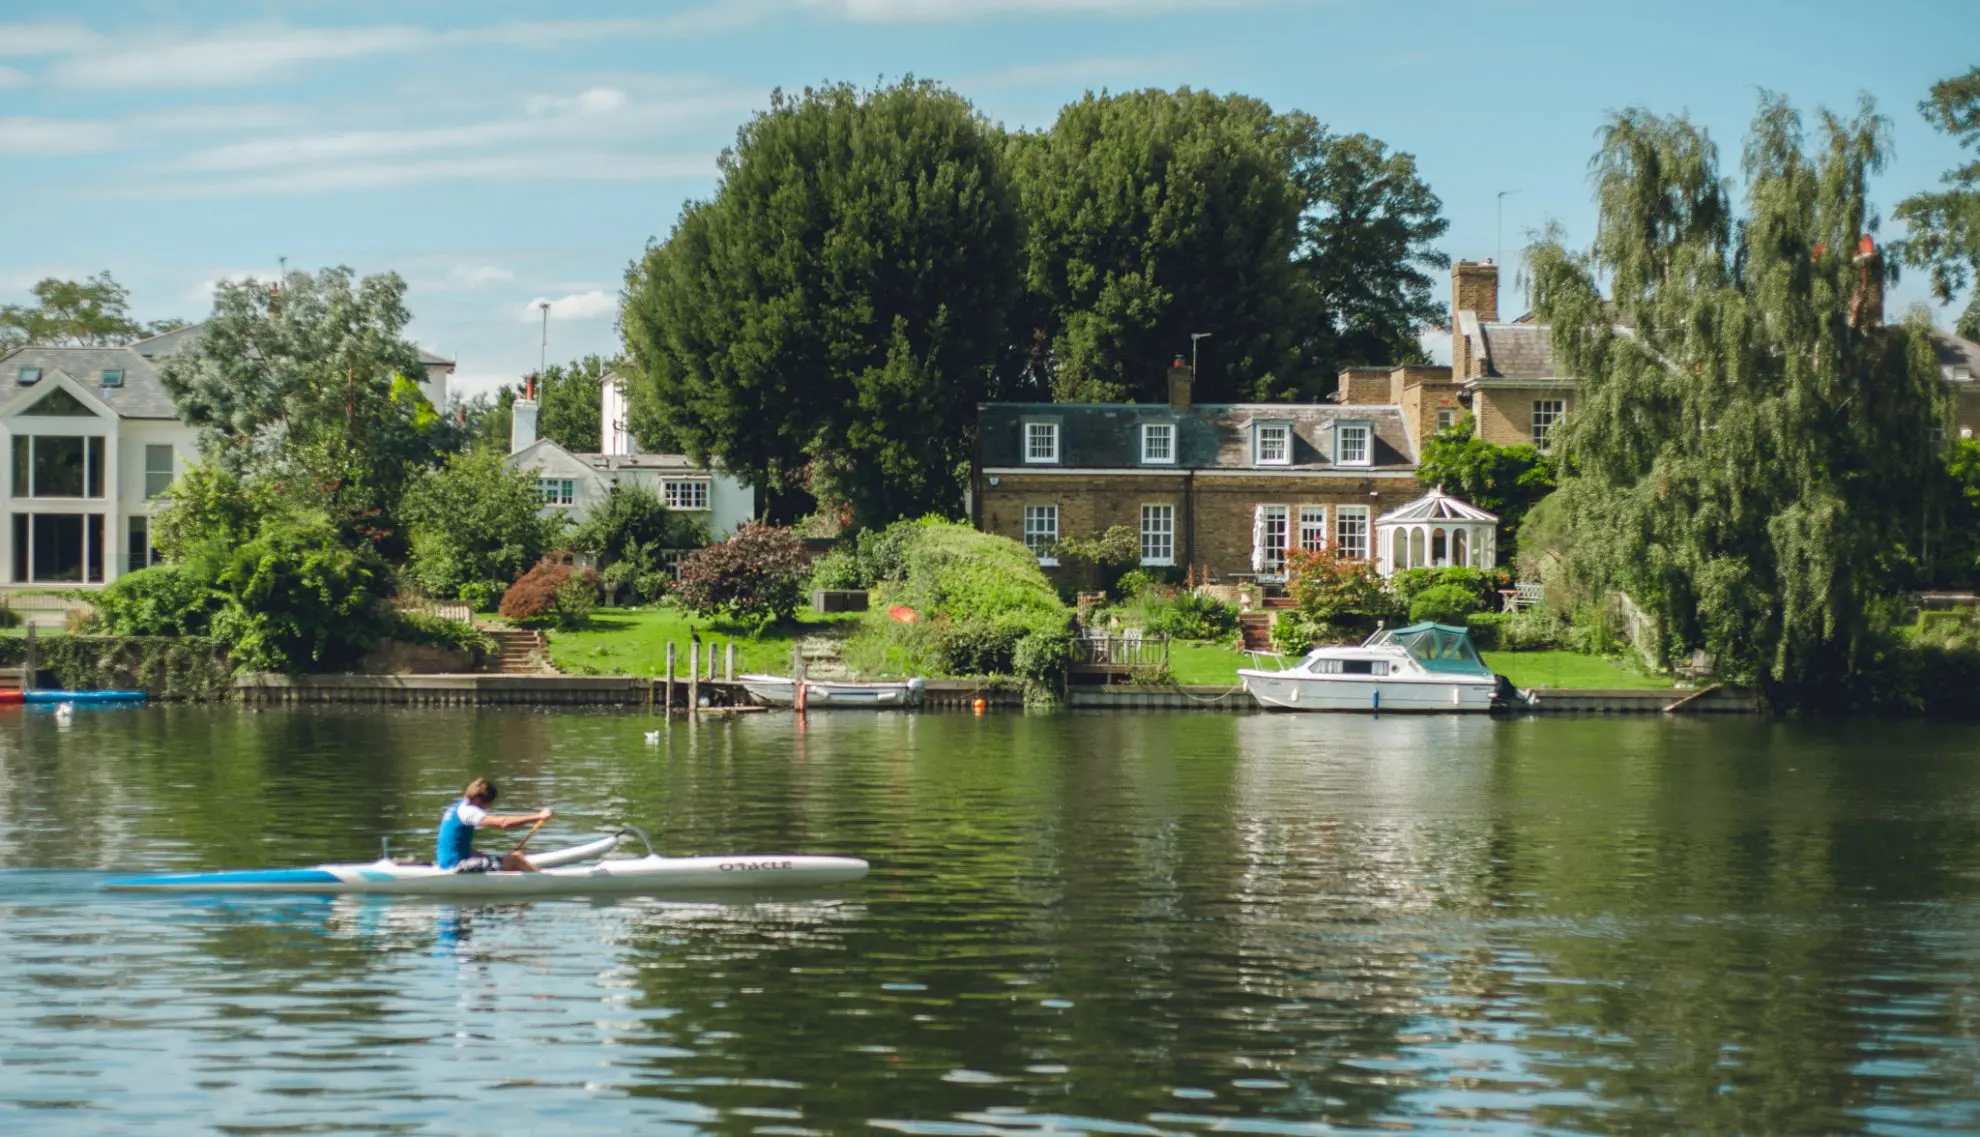 Rower on the river in Kingston upon Thames